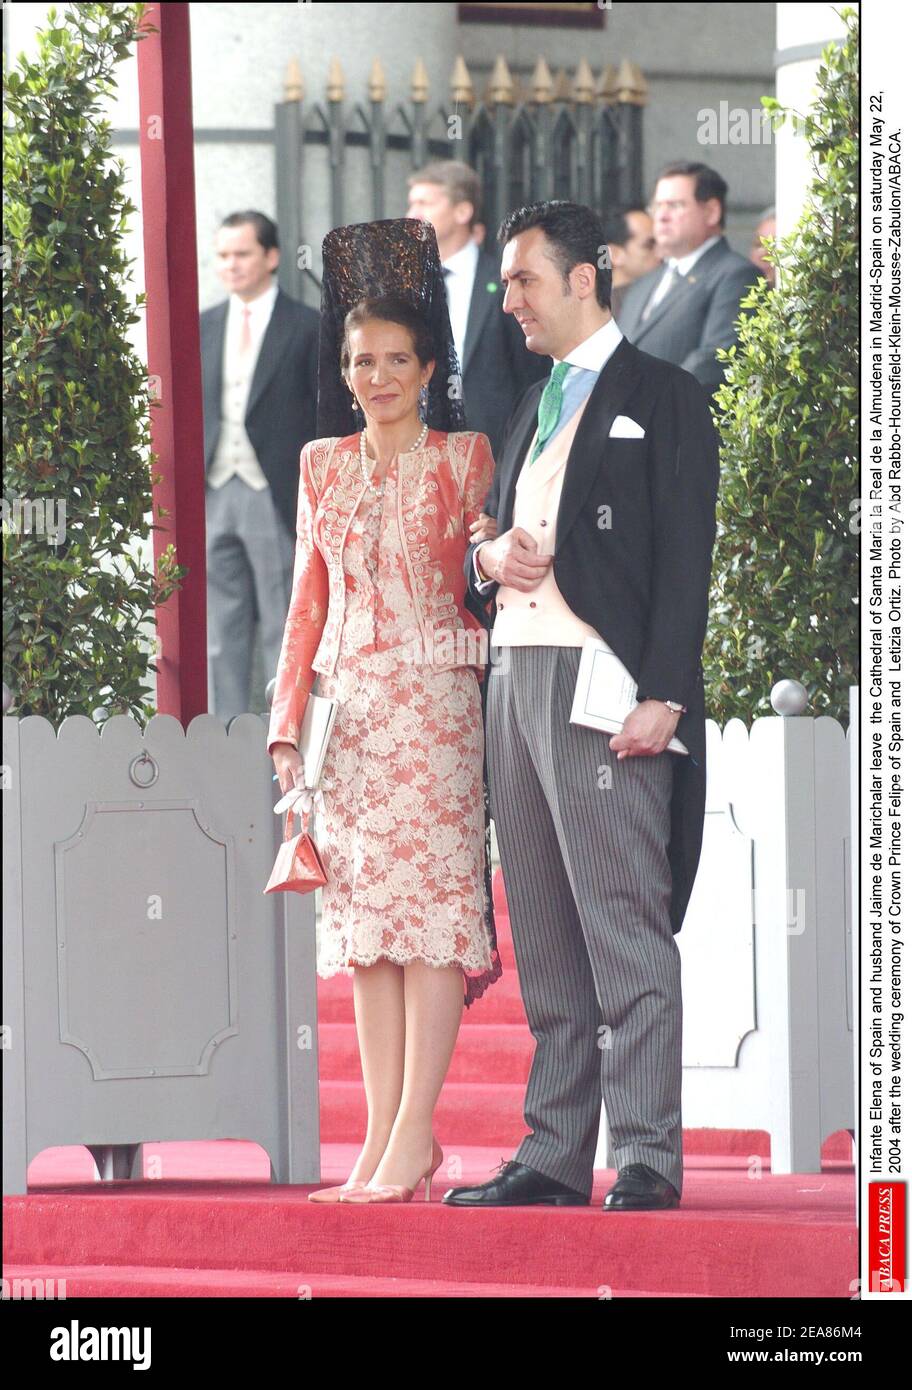 Infante Elena of Spain and husband Jaime de Marichalar leave the Cathedral of Santa Maria la Real de la Almudena in Madrid-Spain on saturday May 22, 2004 after the wedding ceremony of Crown Prince Felipe of Spain and Letizia Ortiz. Photo by Abd Rabbo-Hounsfield-Klein-Mousse-Zabulon/ABACA. Stock Photo